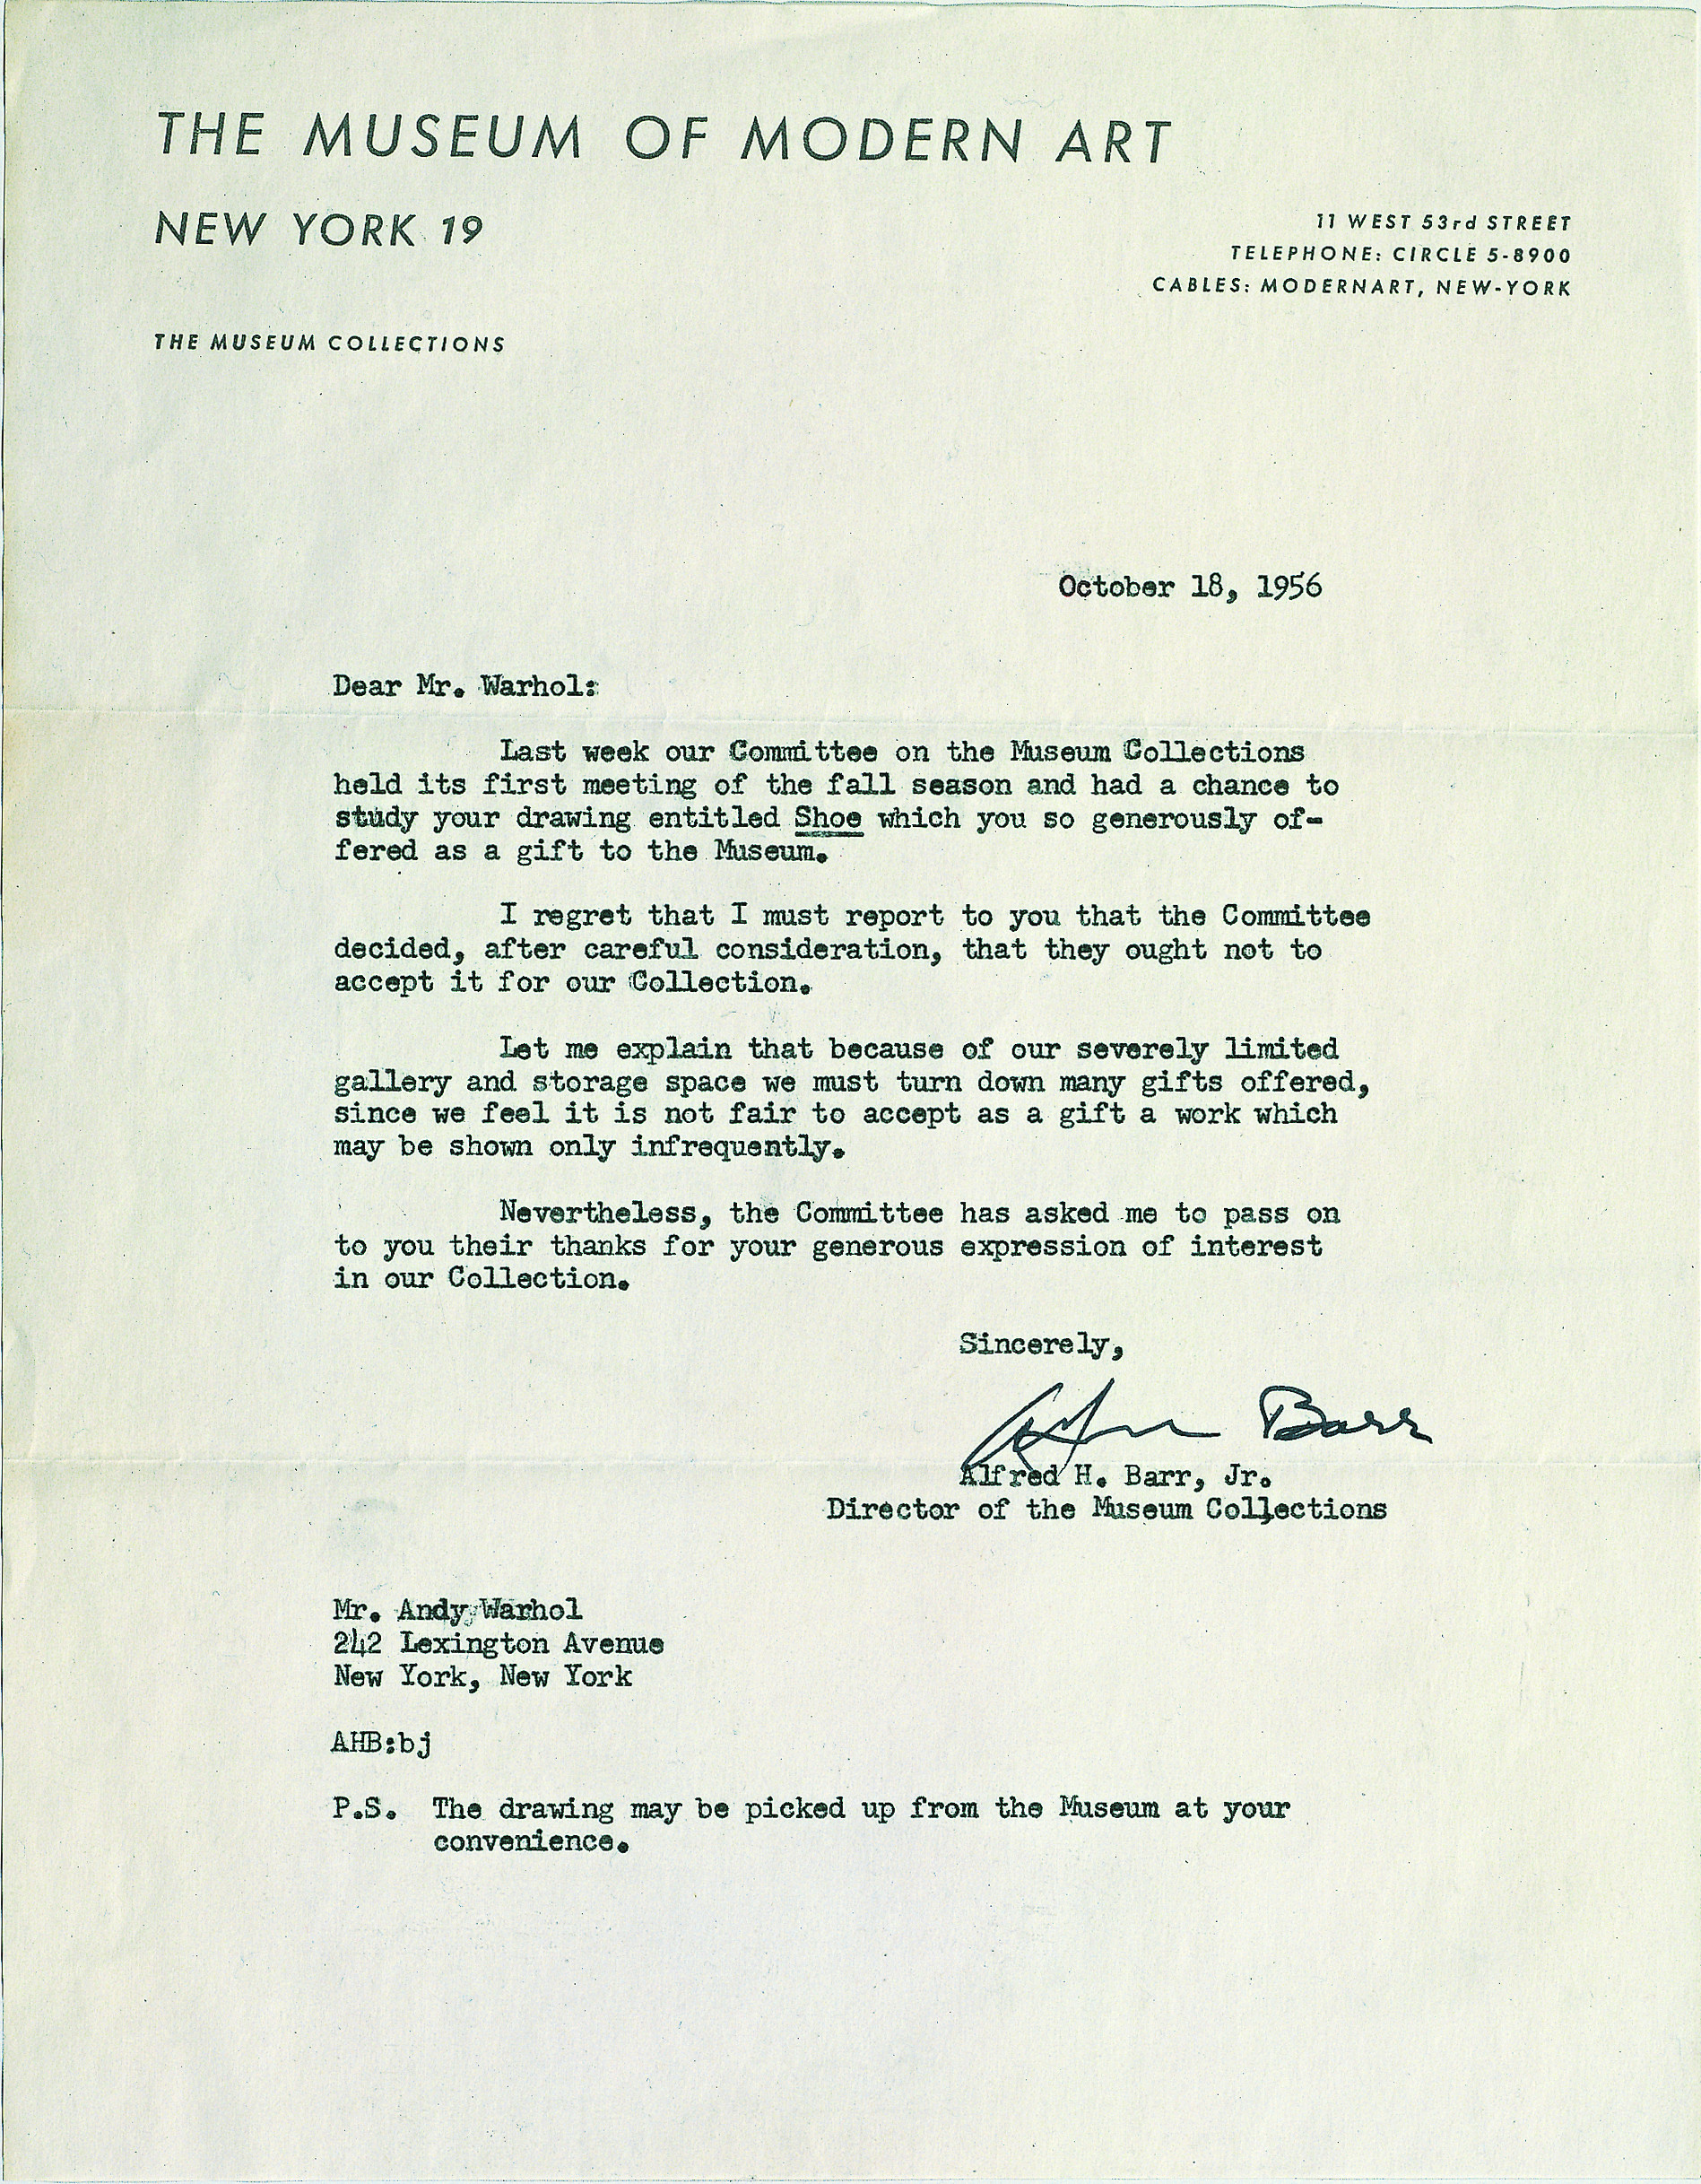 Warhol's MoMA rejection letter, as reproduced in Andy Warhol Giant Size